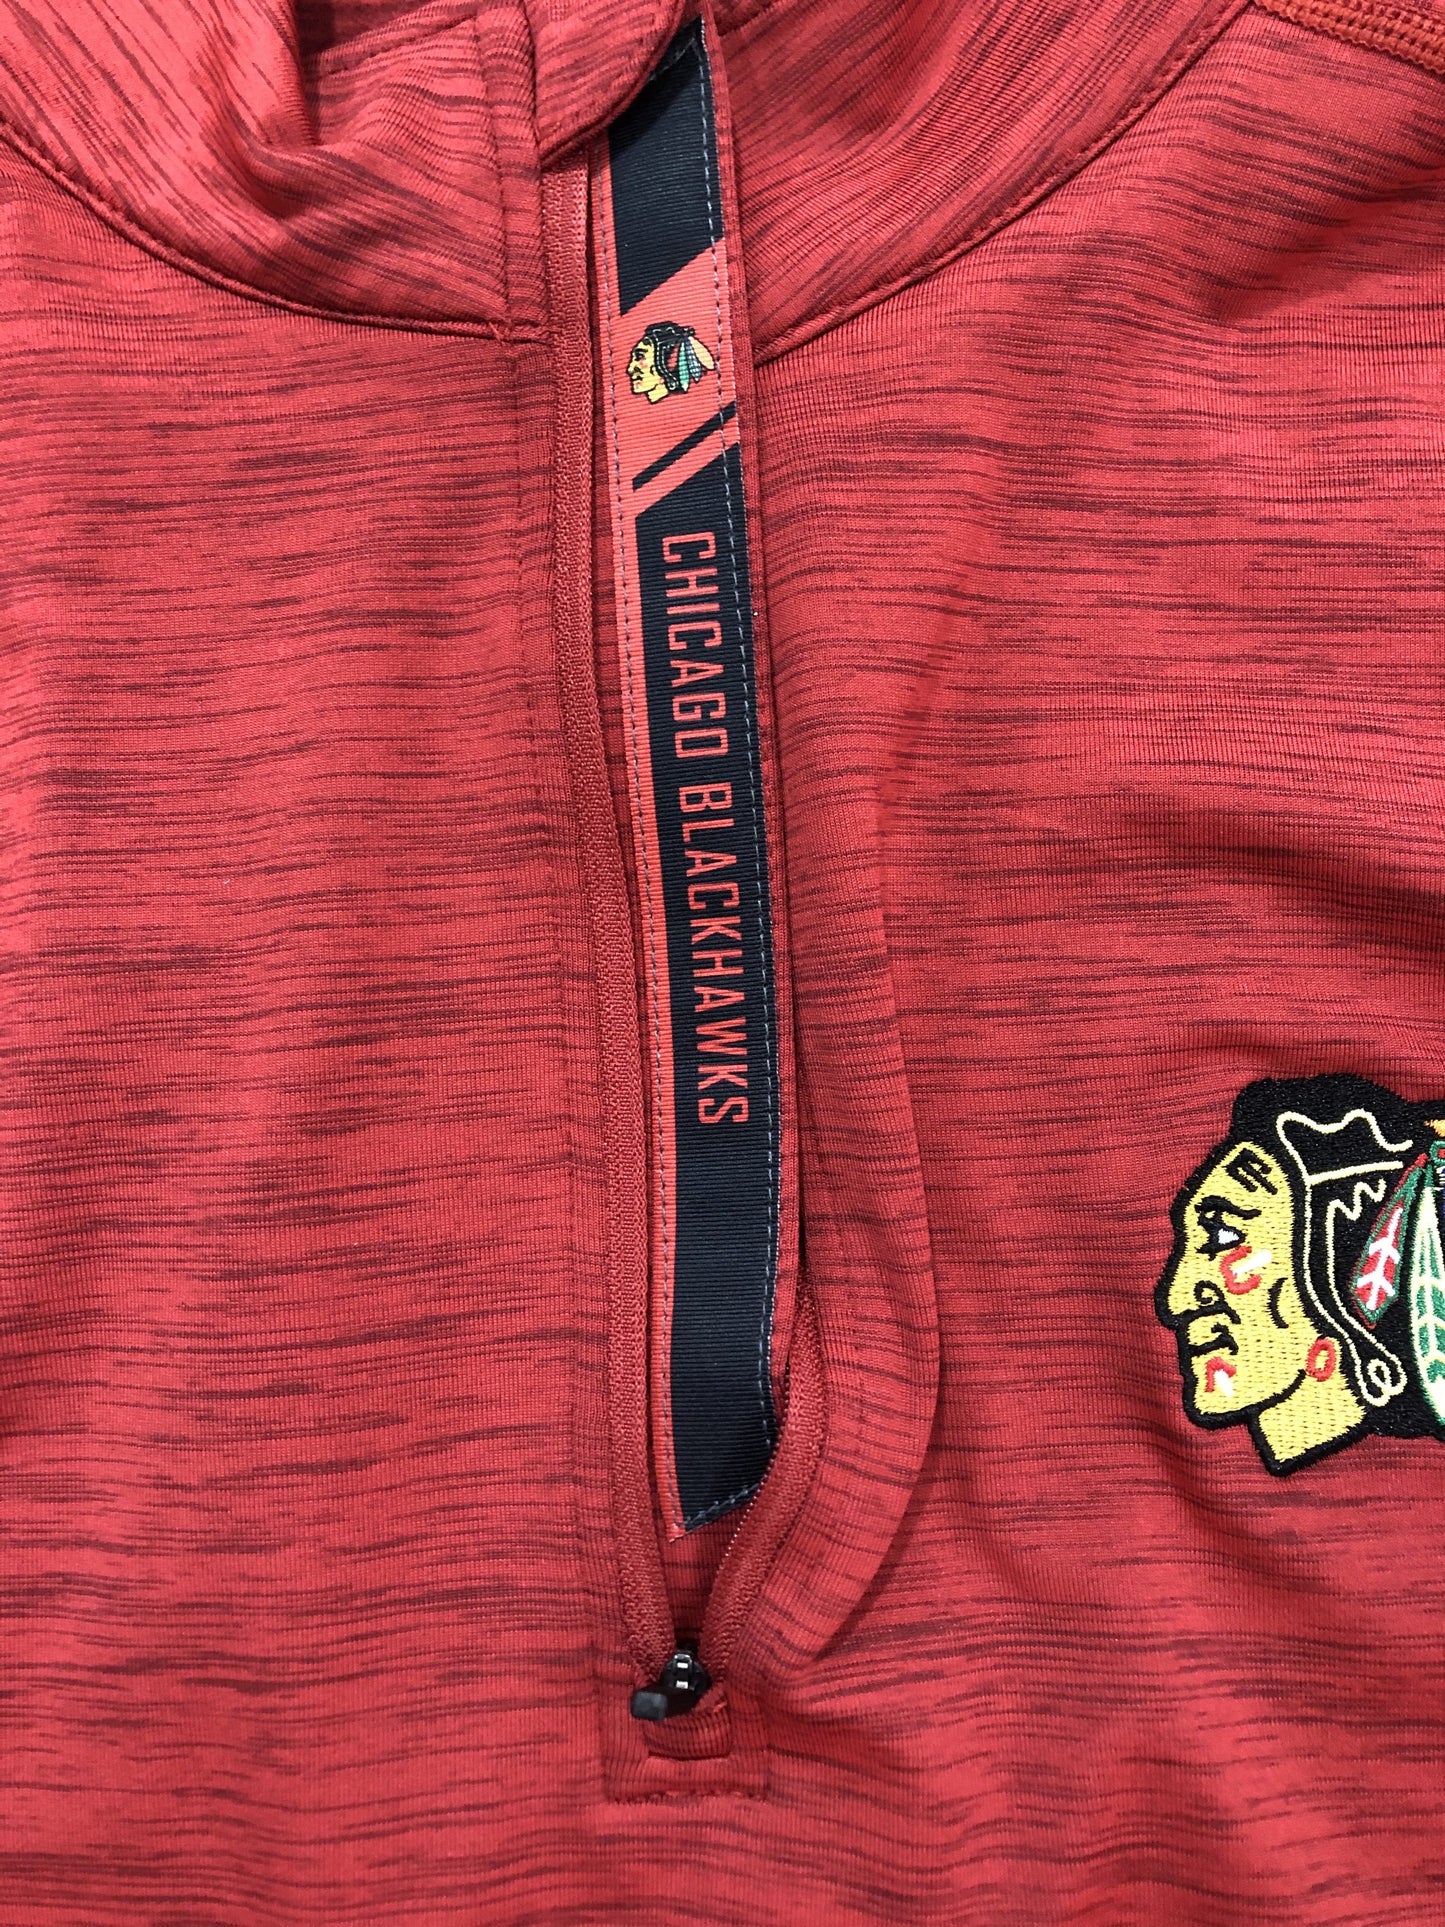 Men’s Chicago Blackhawks Red 1/4 Zip Armour Shear Text Pullover Jacket